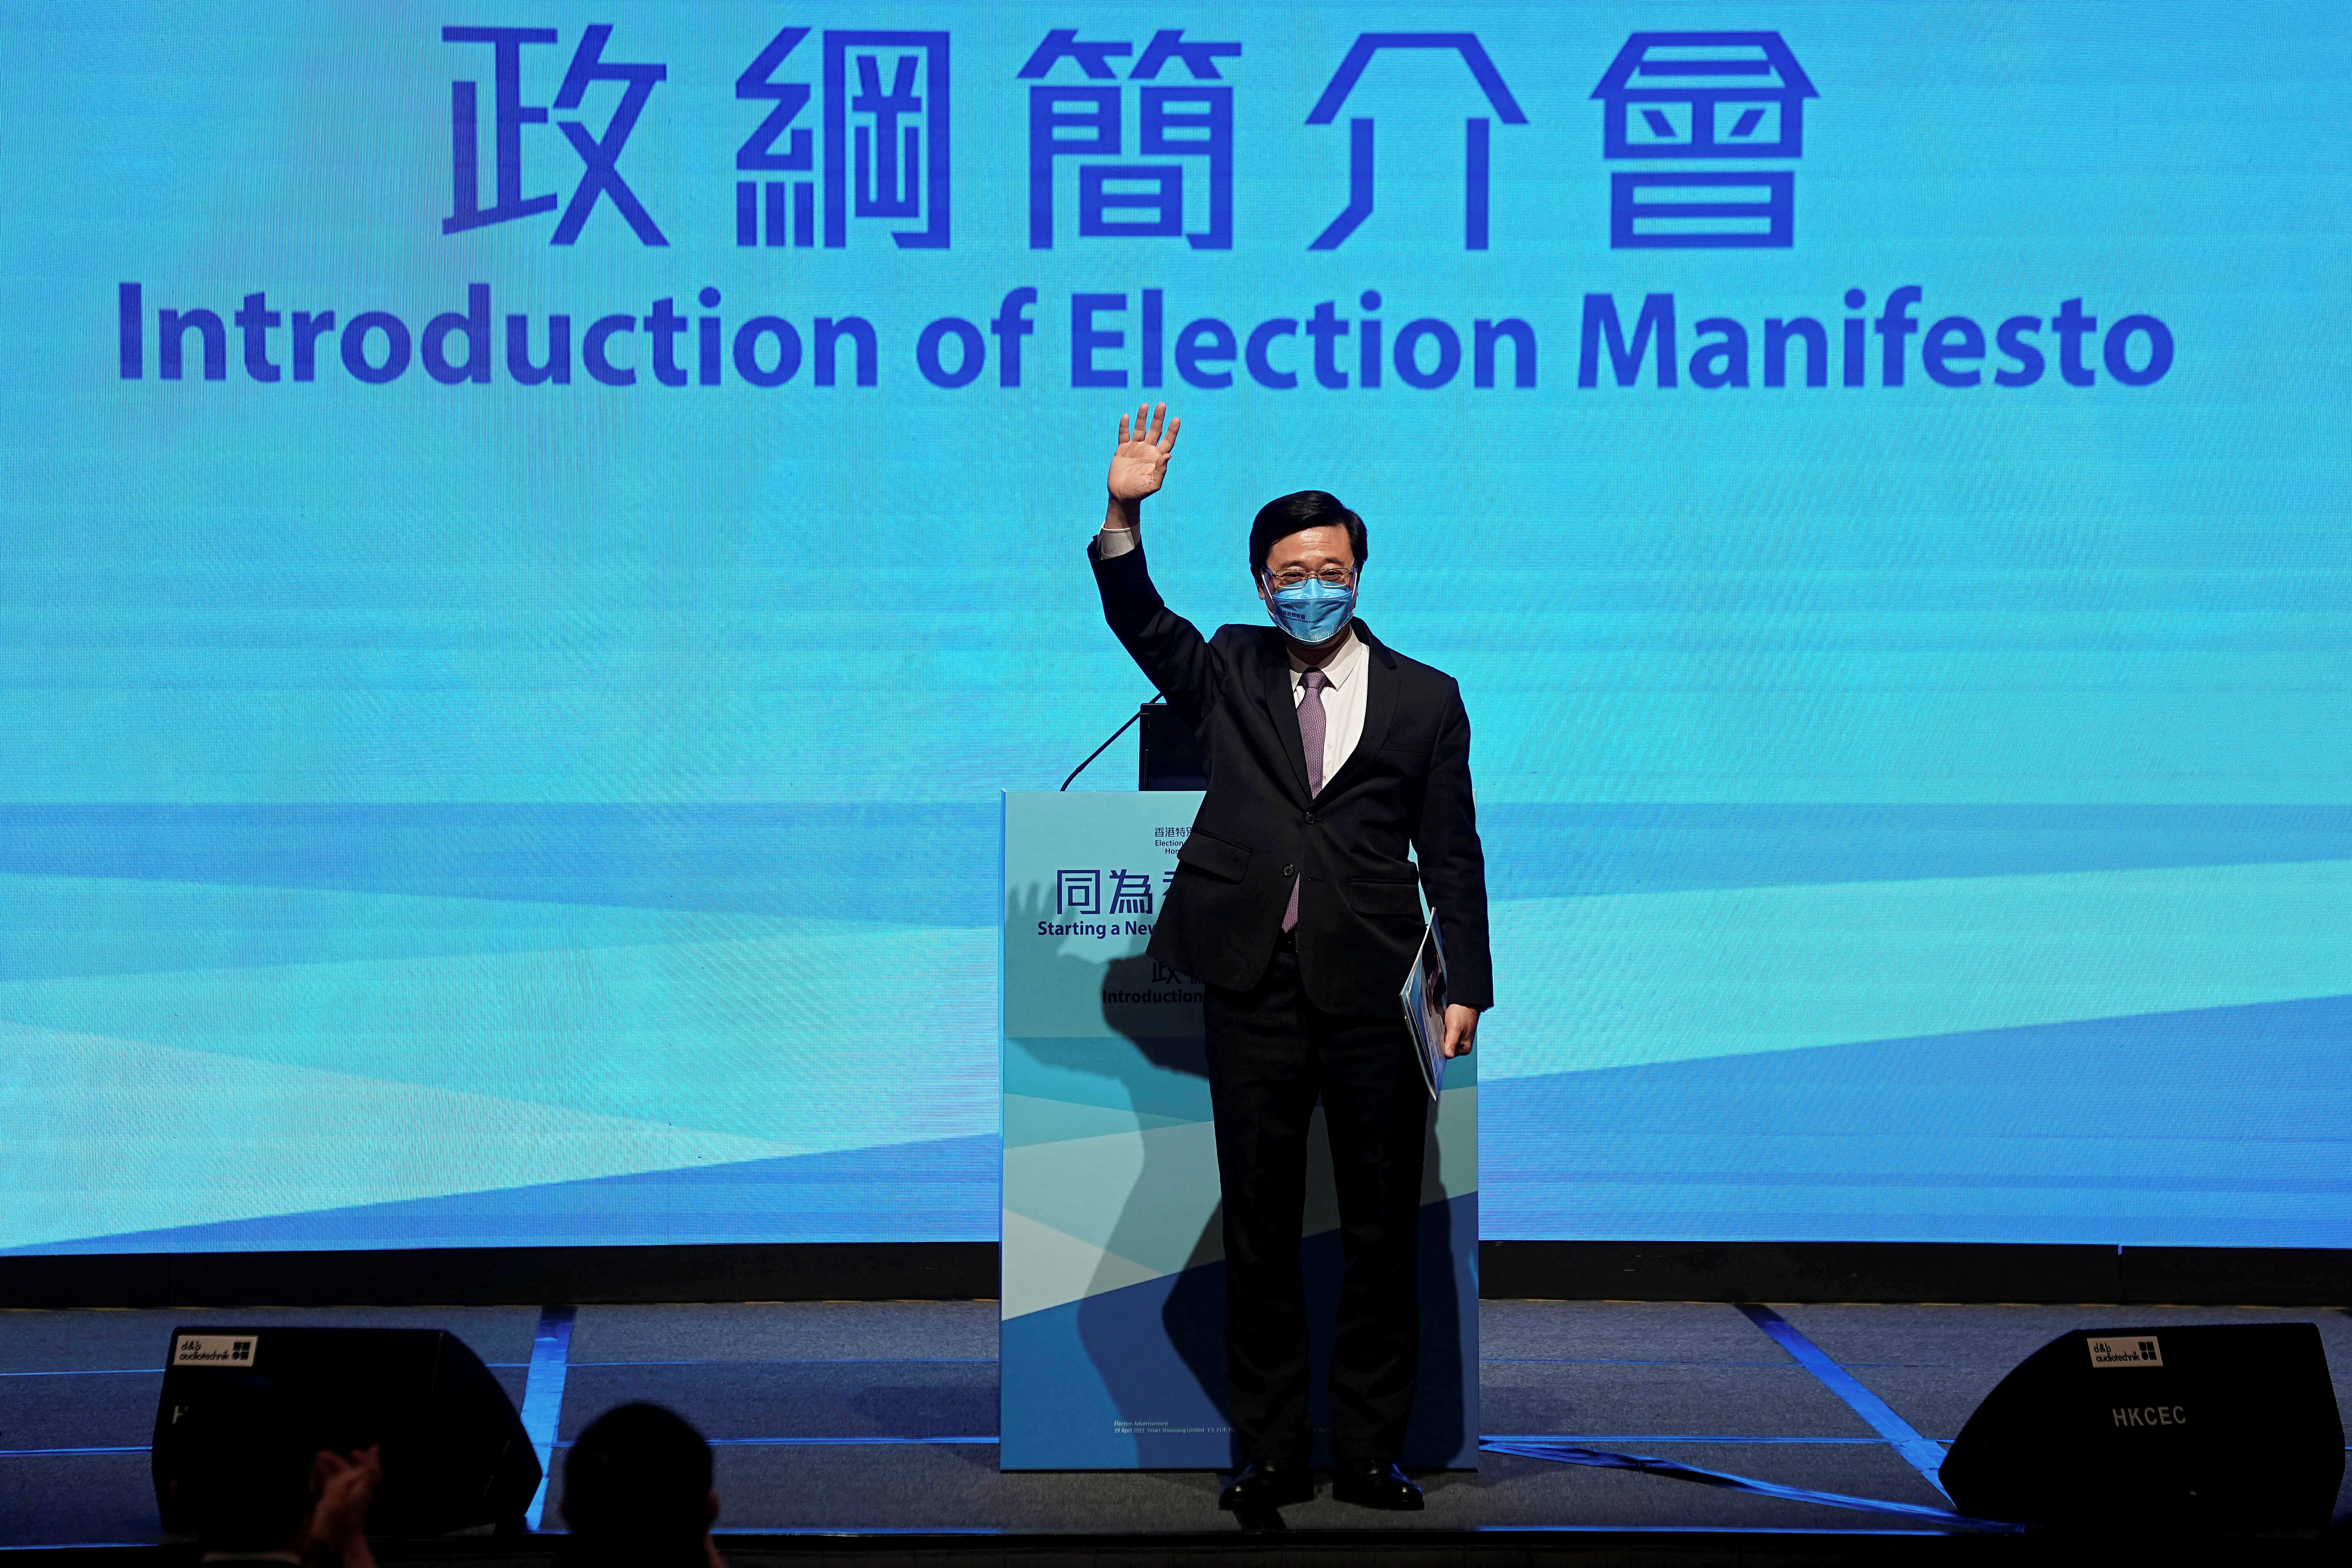 John Lee introduces his election manifesto ahead of the chief executive election in Hong Kong